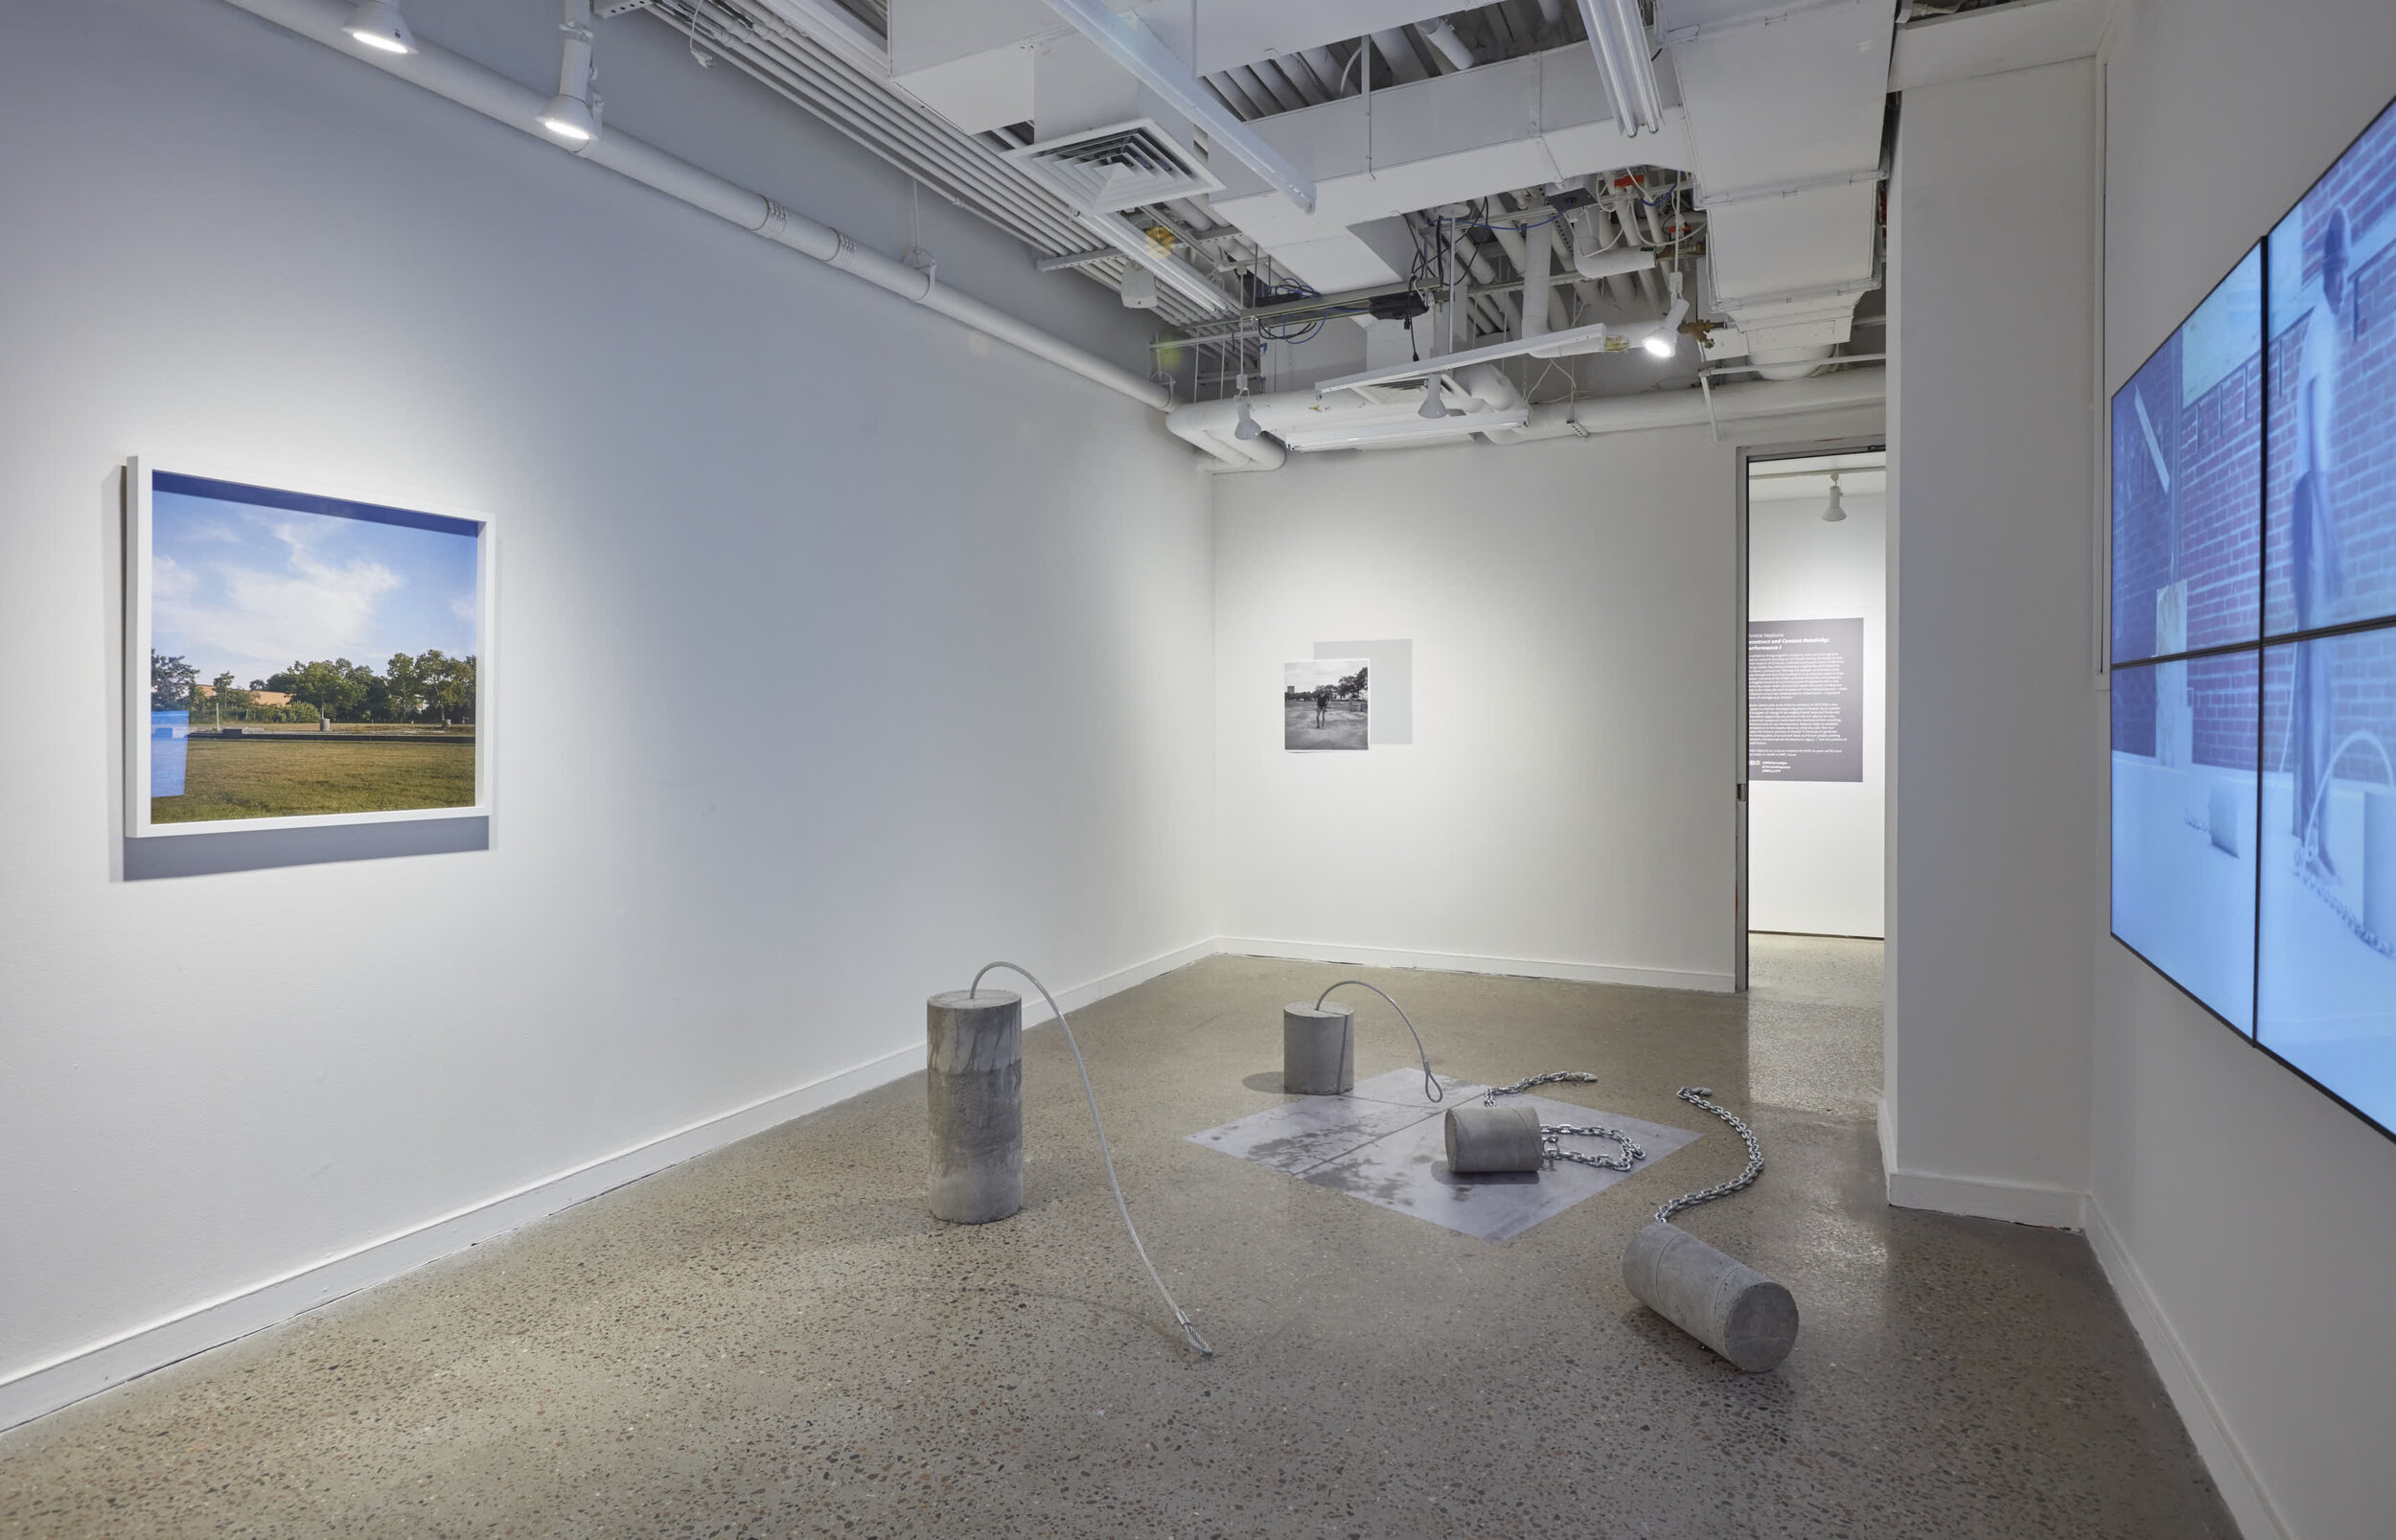 Installation View of Constructs and Context Relativity: Performance I, 2020